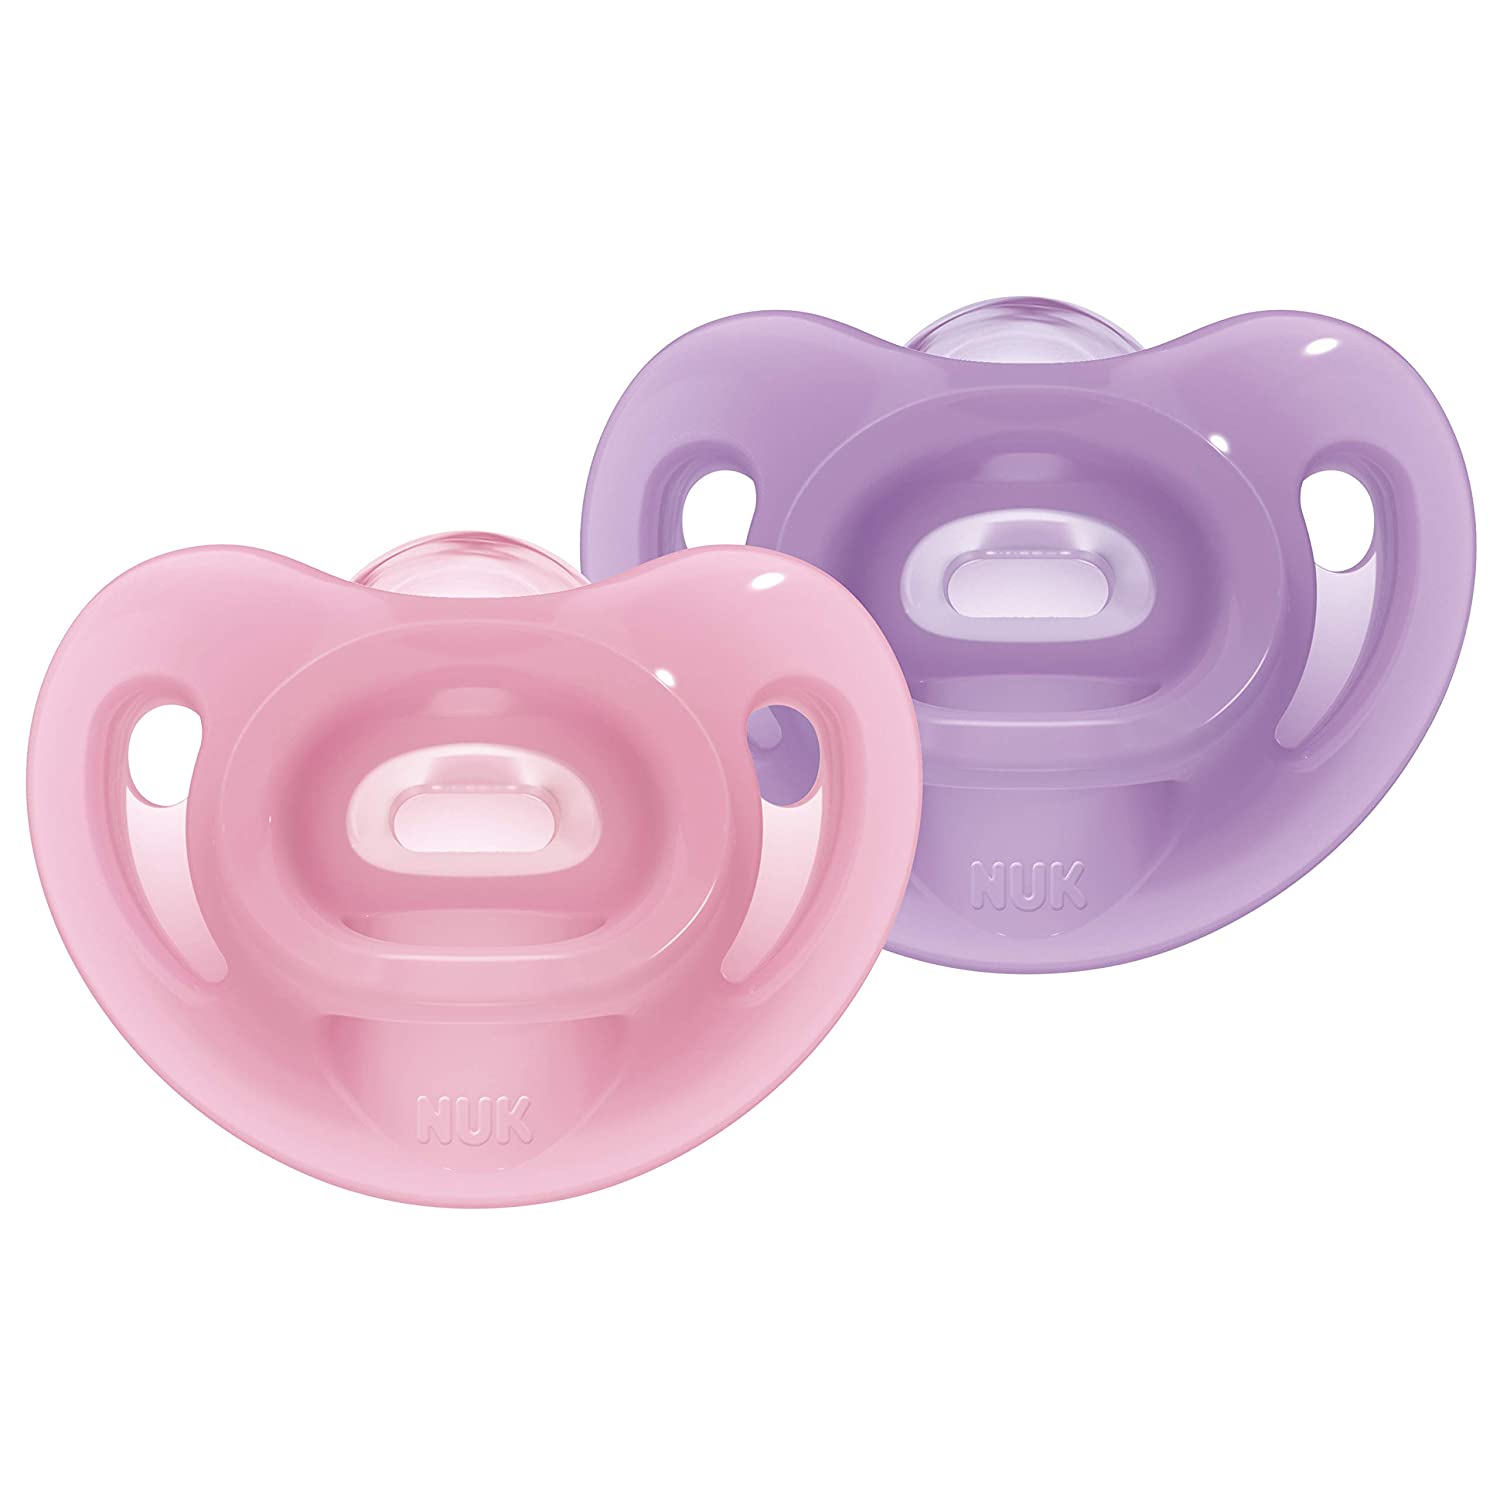 NUK Sensitive Pacifiers | 0-6 Months | 100% Silicone for Delicate Skin | BPA Free | Purple & Pink | Pack of 2